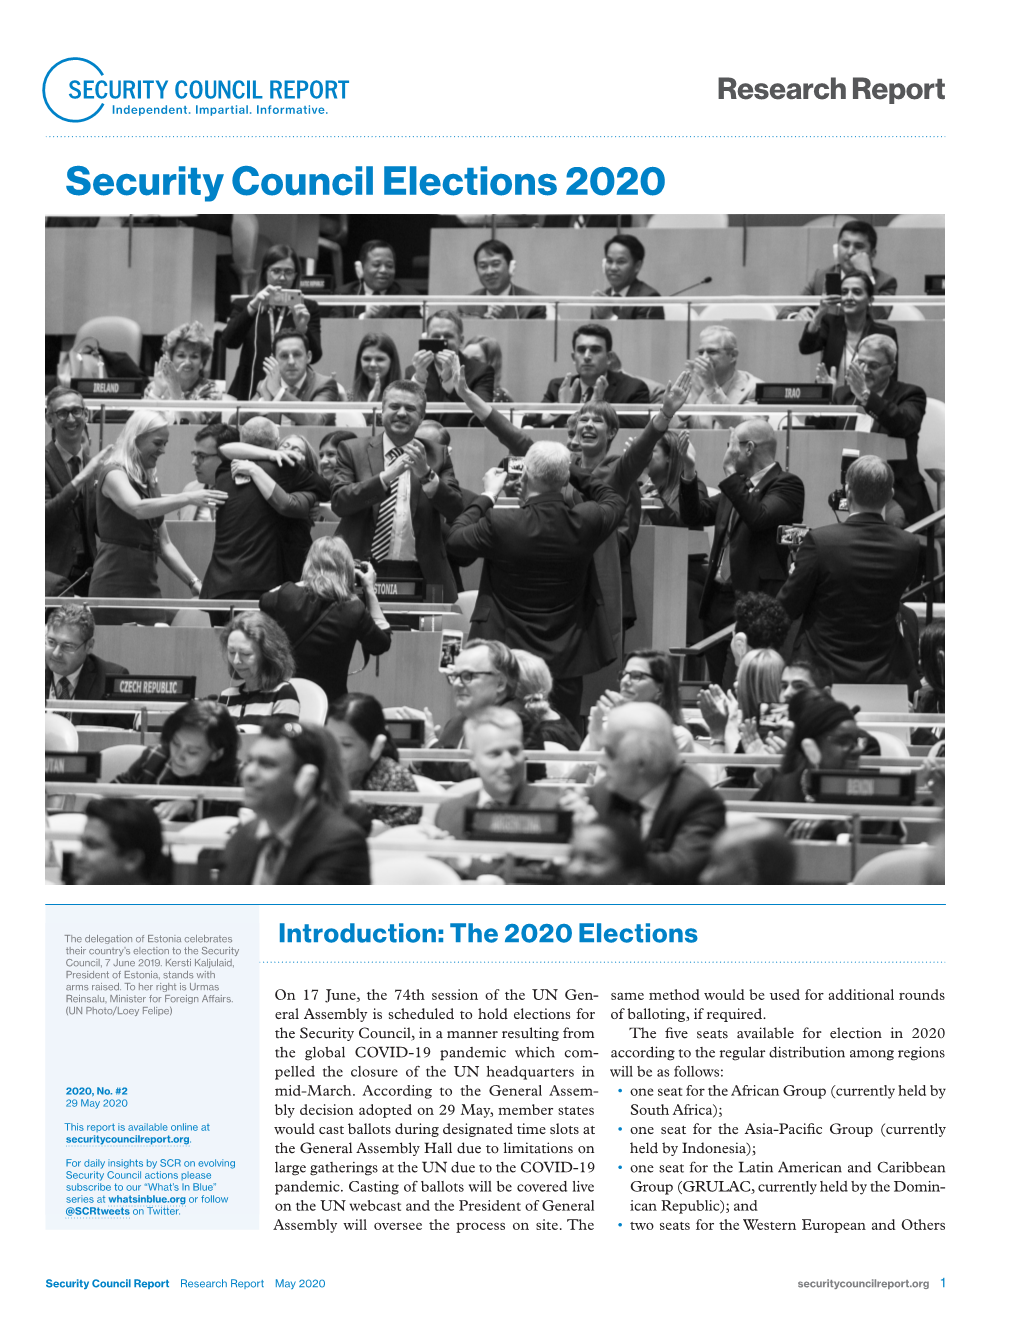 Security Council Elections 2020